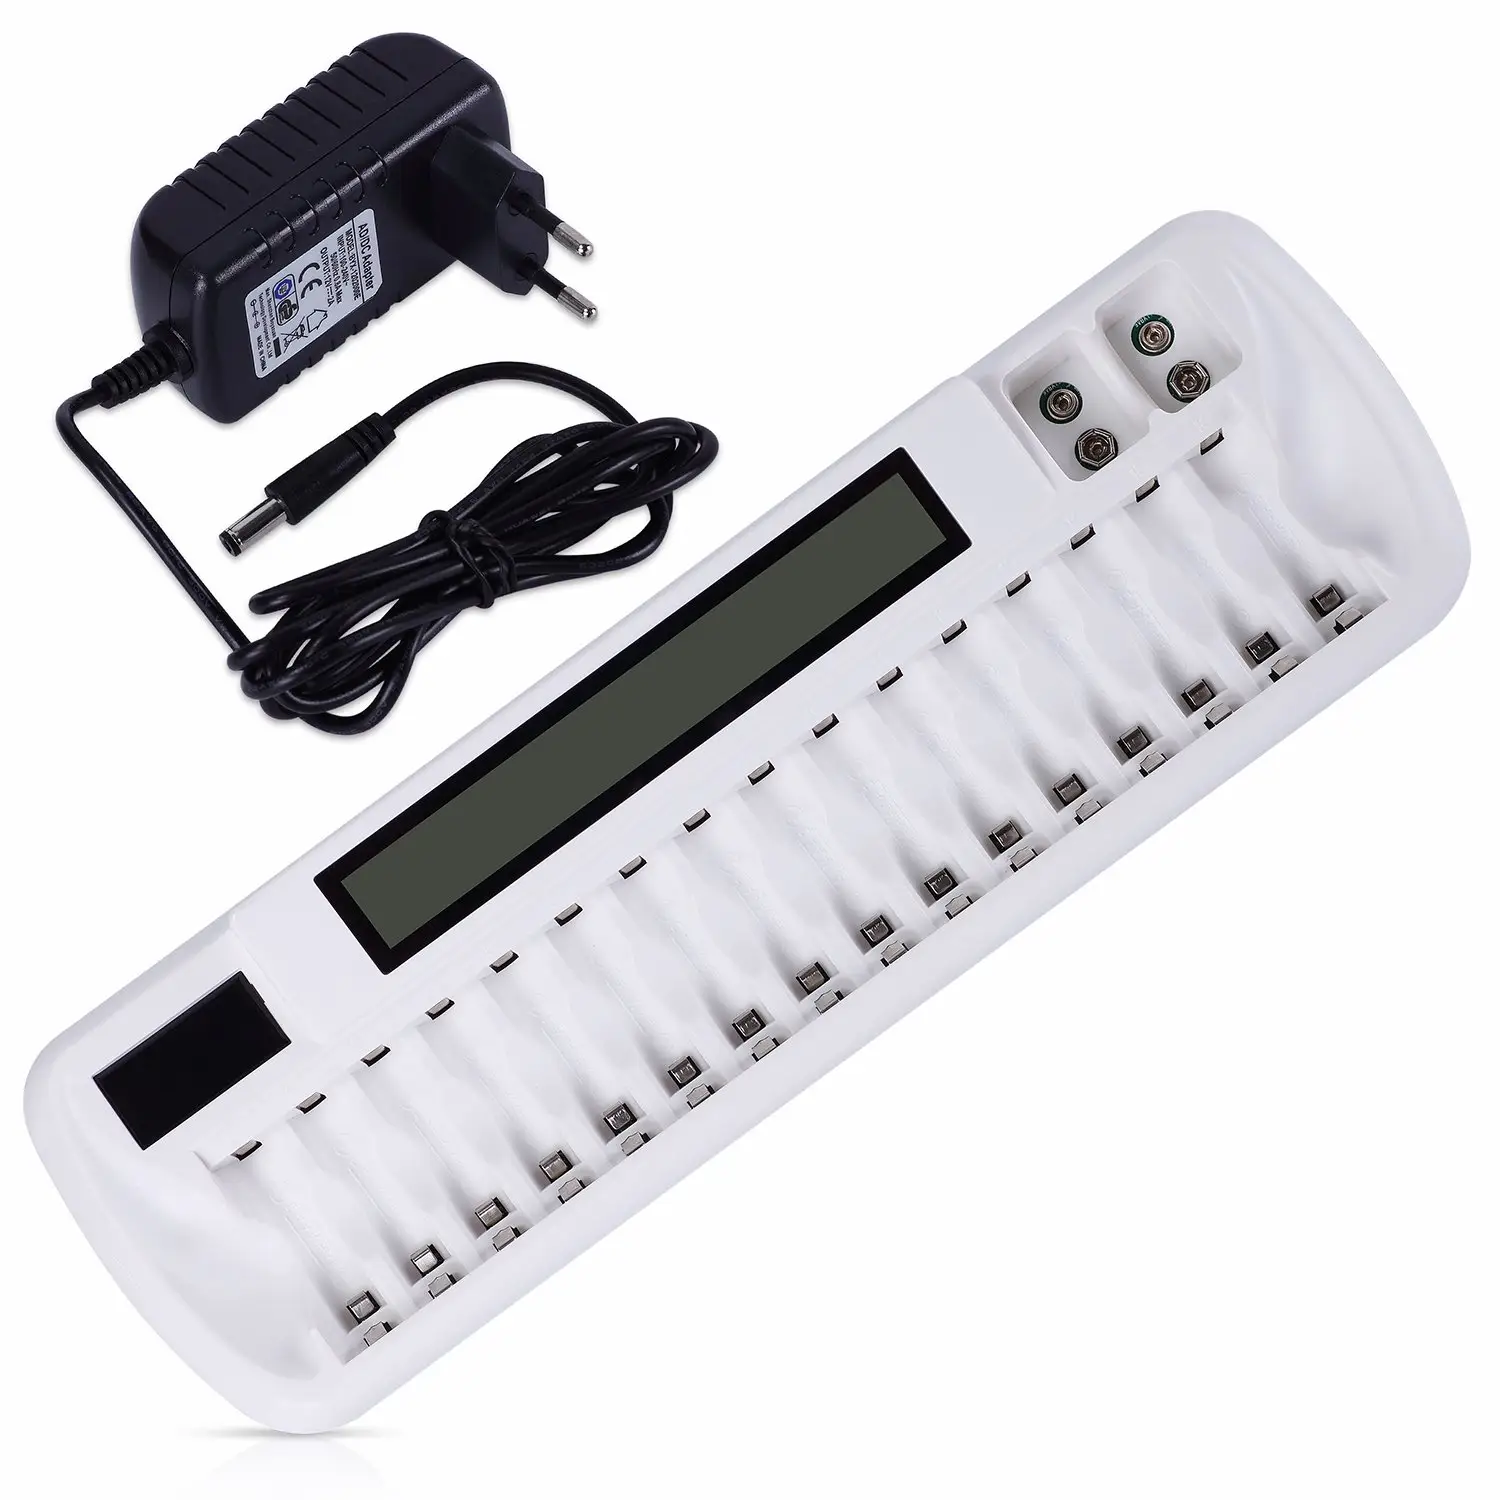 16 Bays NIMH Battery Charger Smart LCD Battery Charger aa aaa battery charger with factory prices